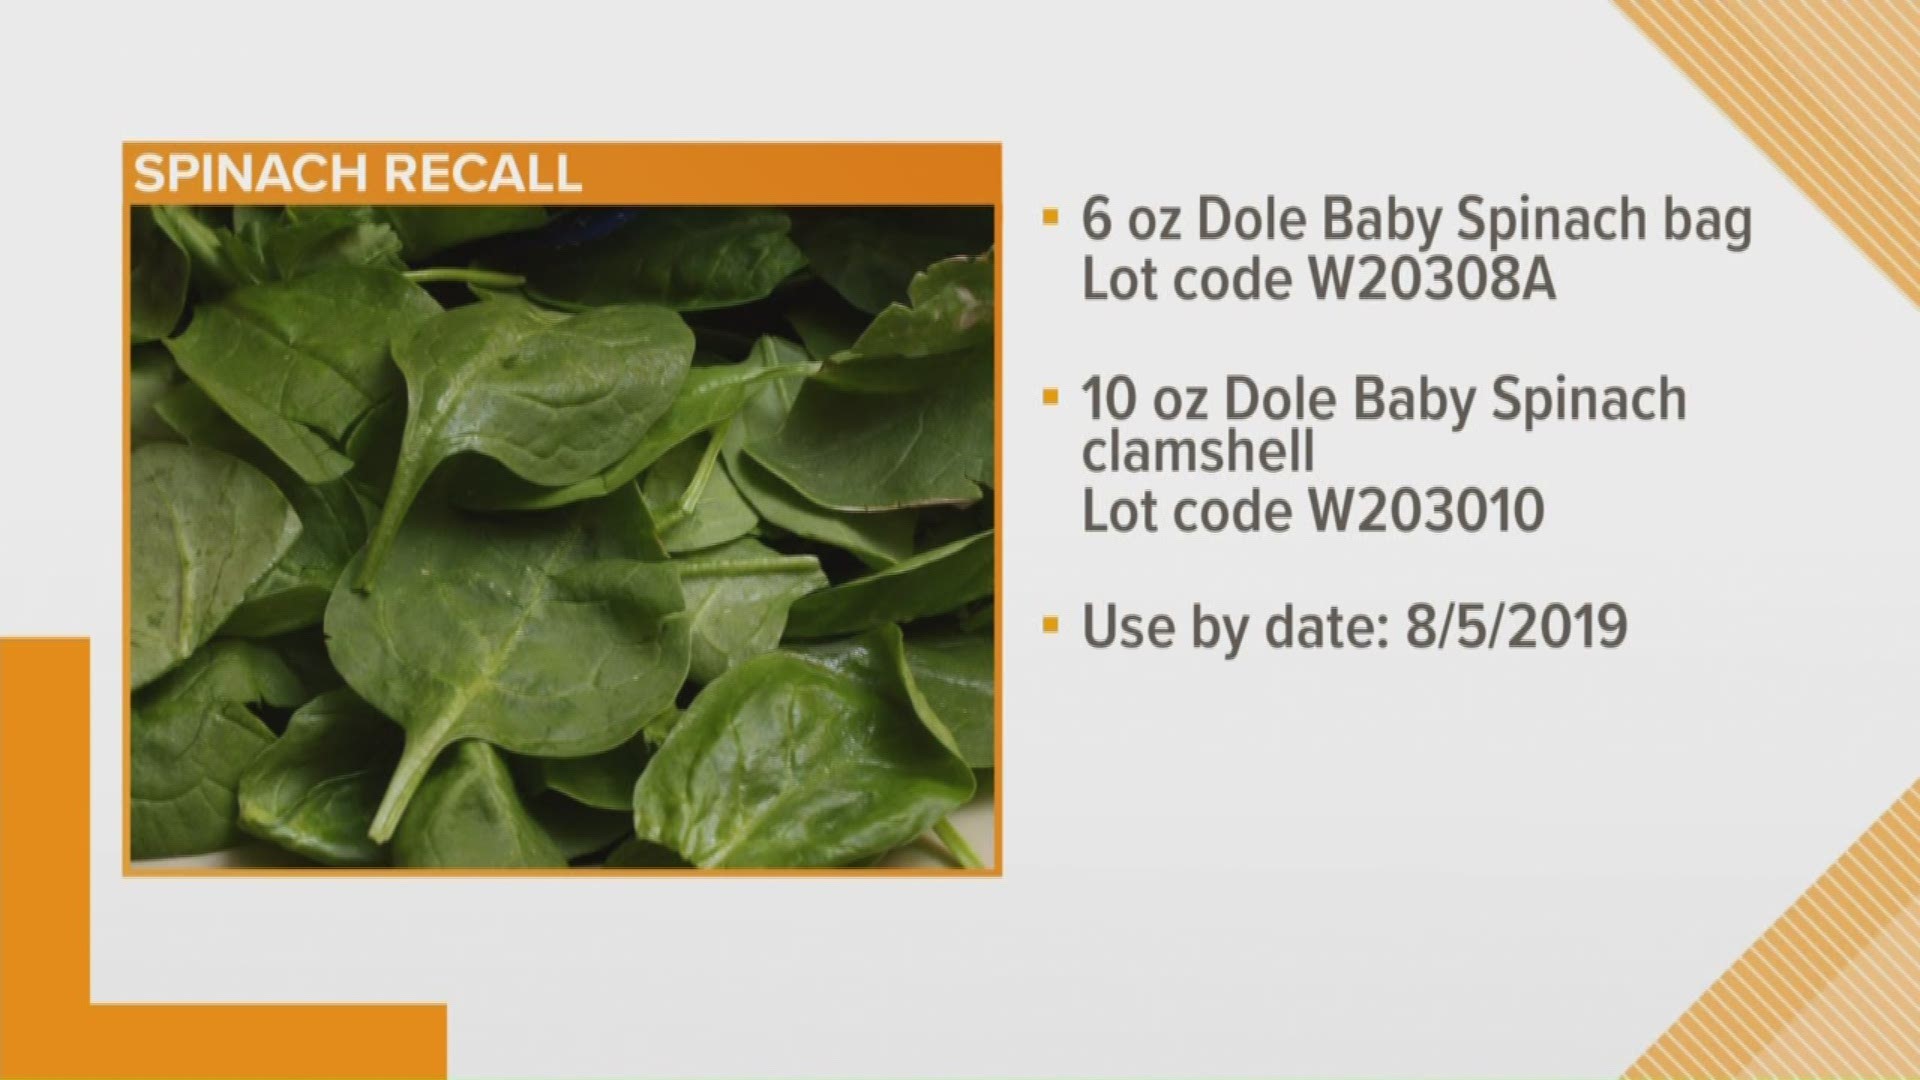 Dole Fresh Vegetables is voluntarily recalling a limited number of cases of baby spinach due to the product being expired. There is a possible health risk from Salmonella with these products. Dole is coordinating with regulatory officials and no illnesses have been reported in association with the recall.